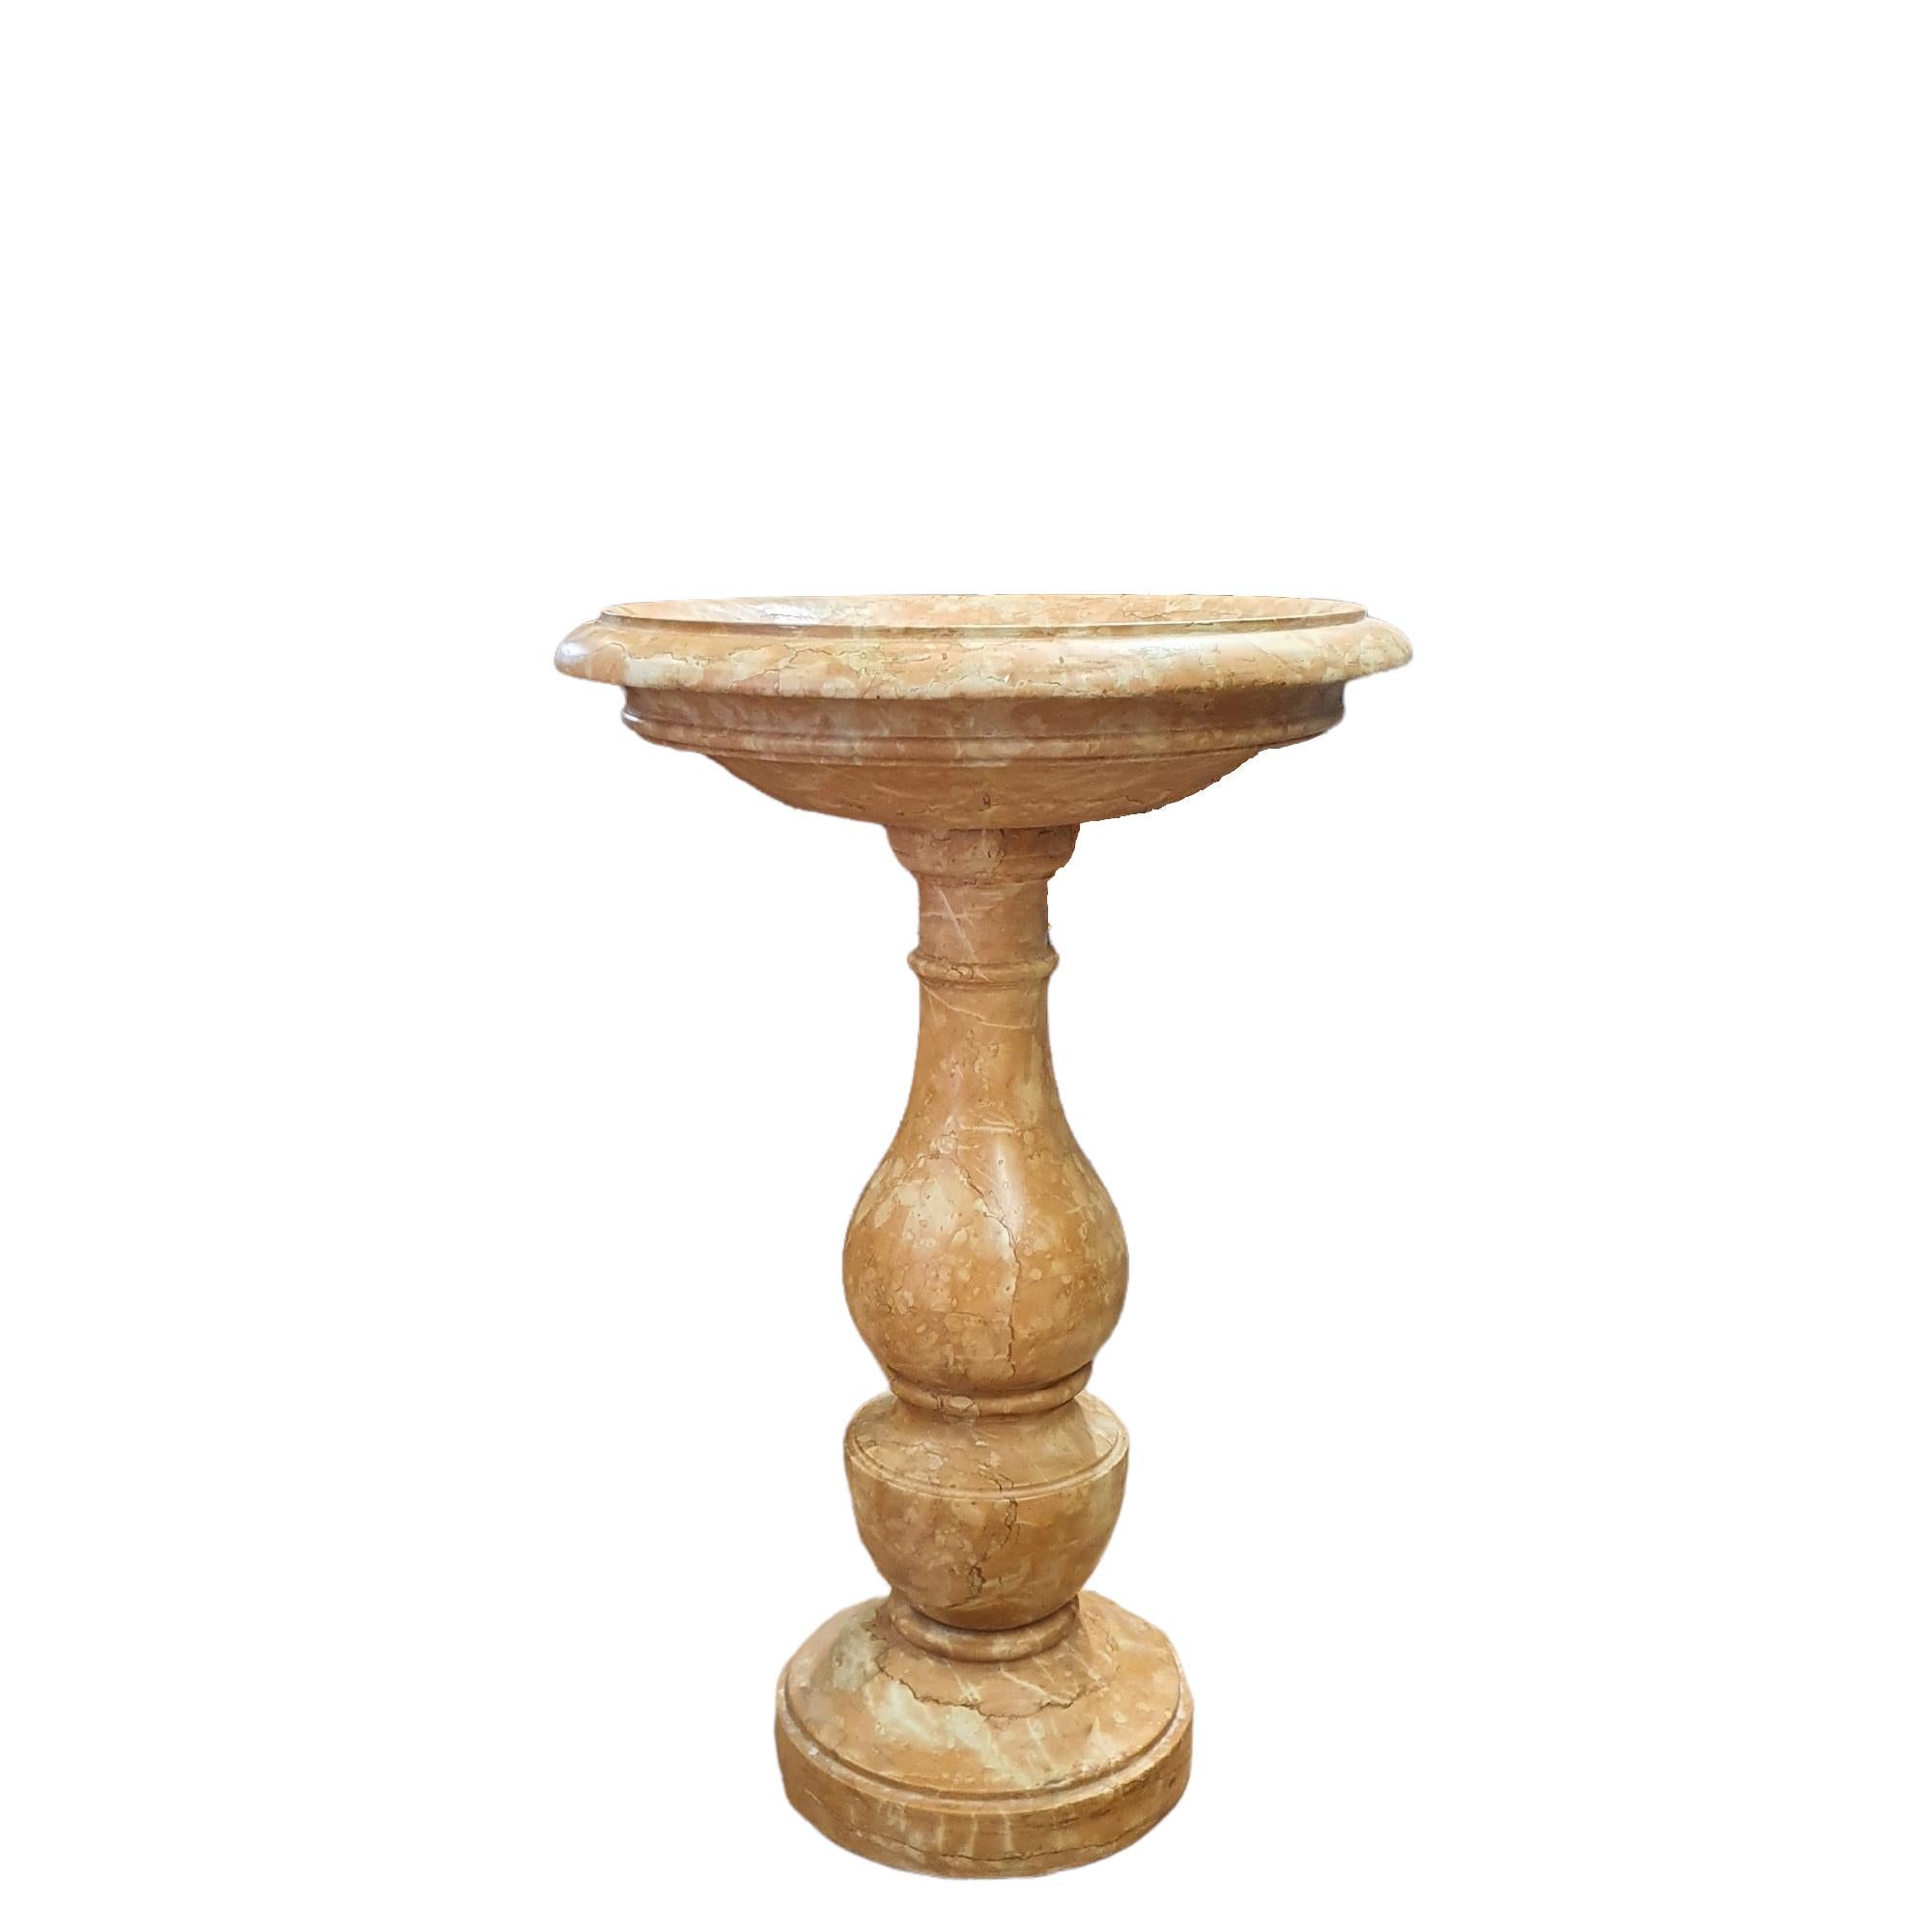 Holy water stoup in red Piana degli Albanesi marble, made in Sicily at the end of the 19th century.